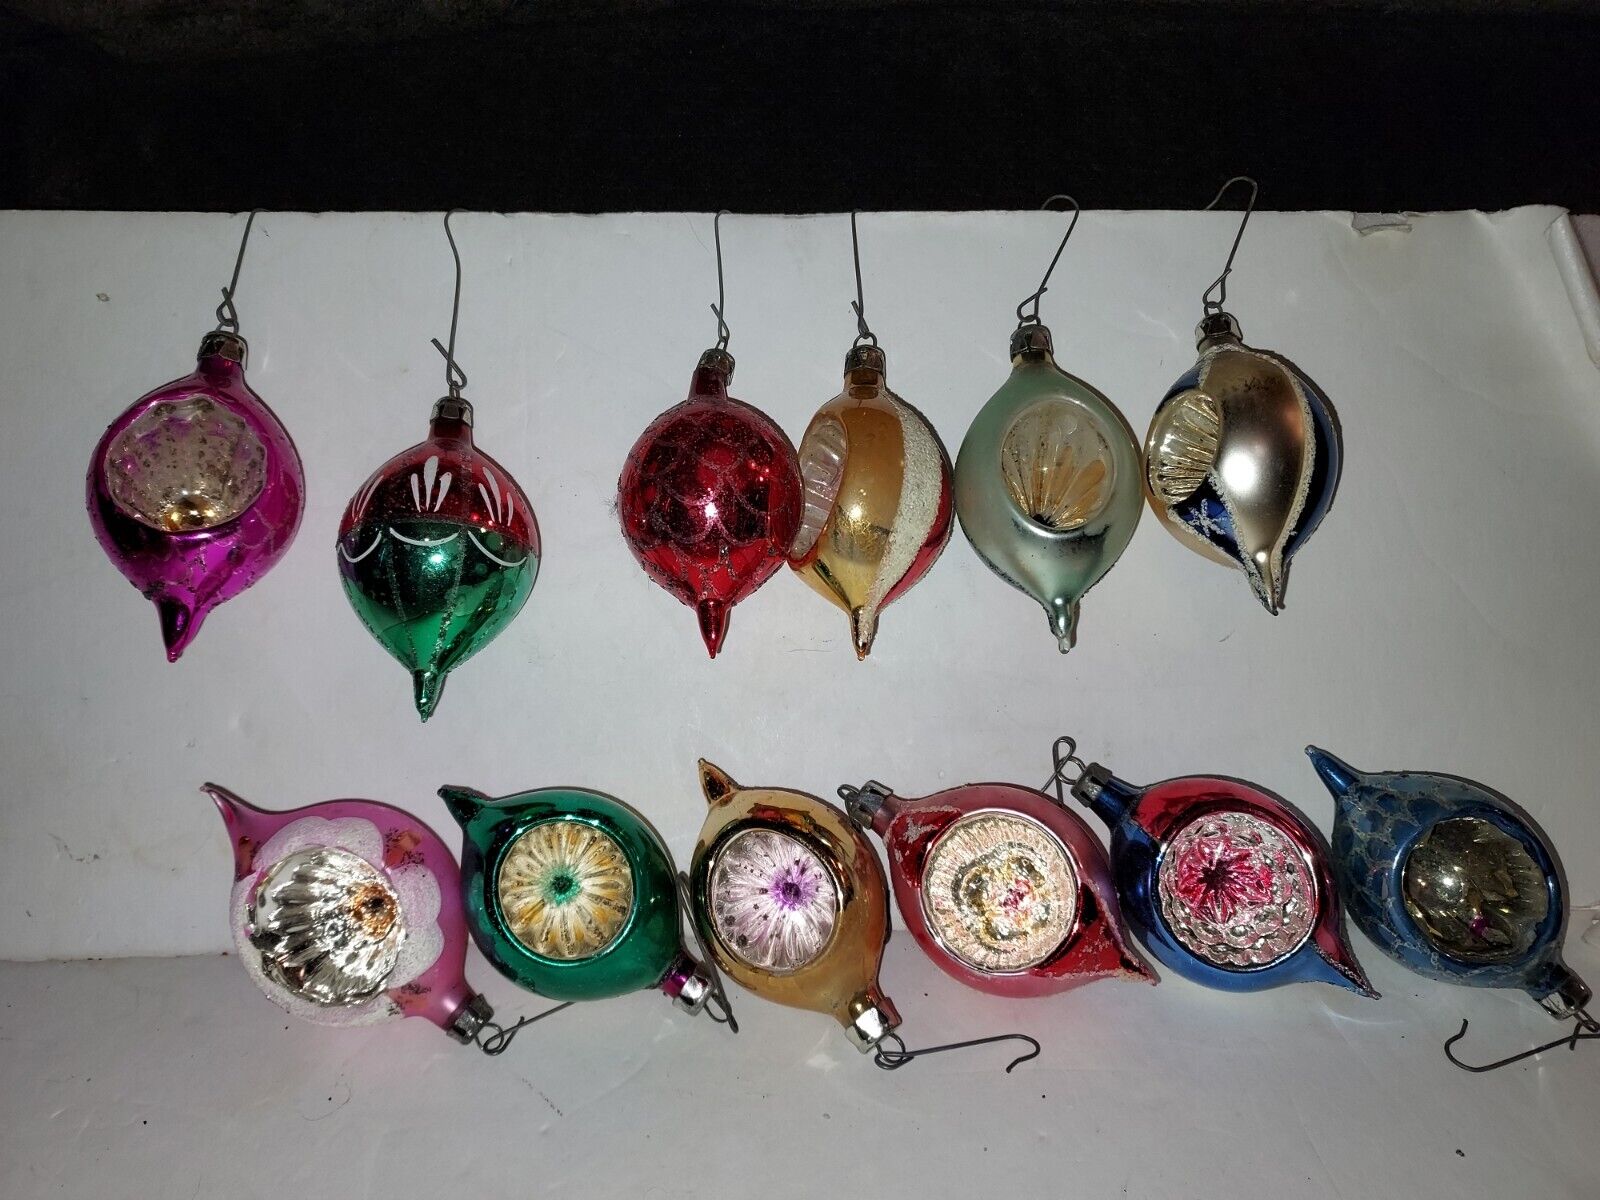 Vintage Mercury Glass Teardrop Shaped Indented Ornaments (Lot of 12)